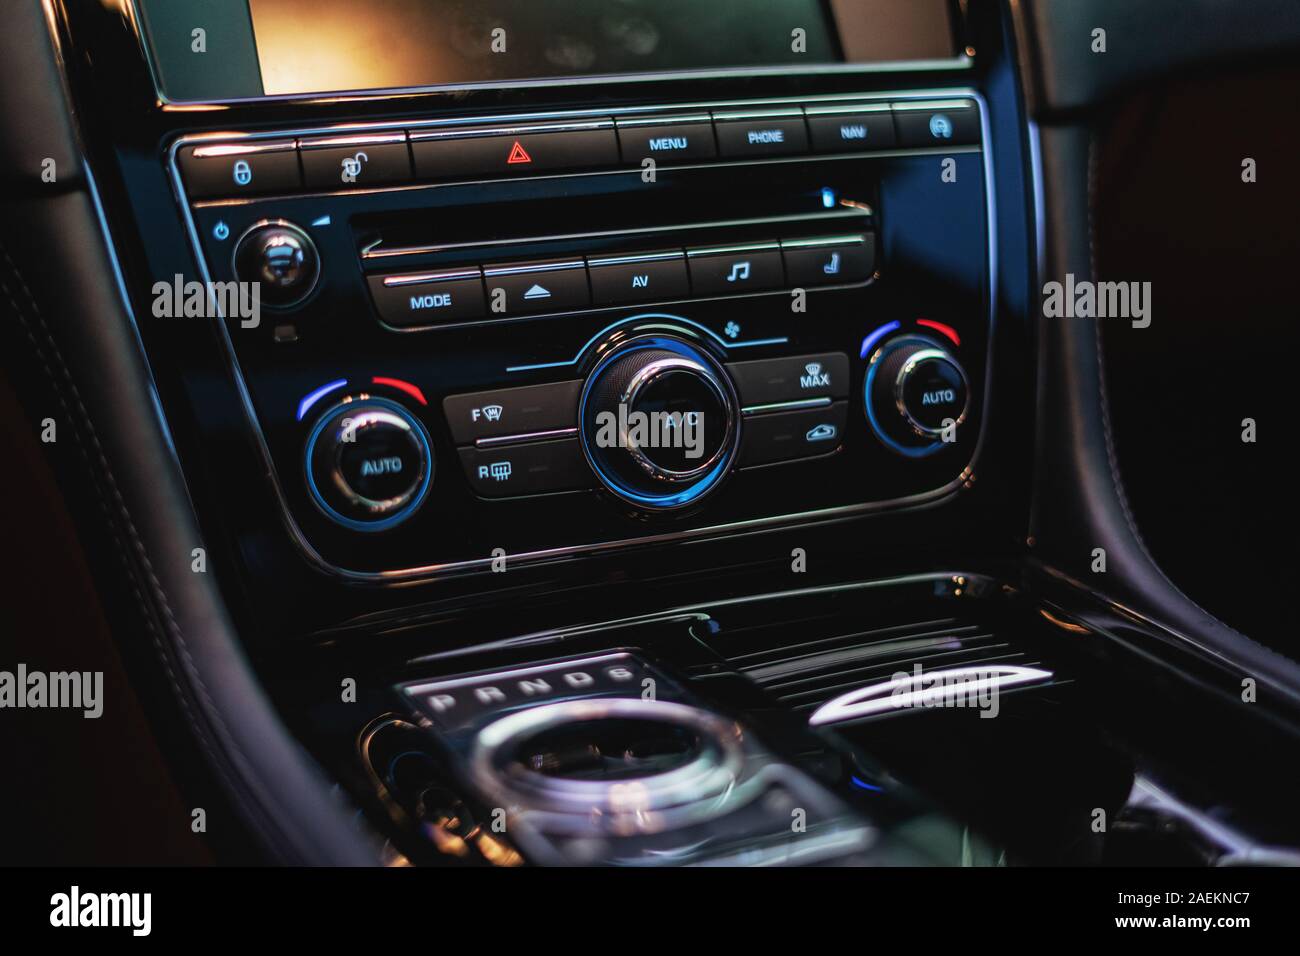 Modetn luxuty climate control with cold and hot adjustments Stock Photo